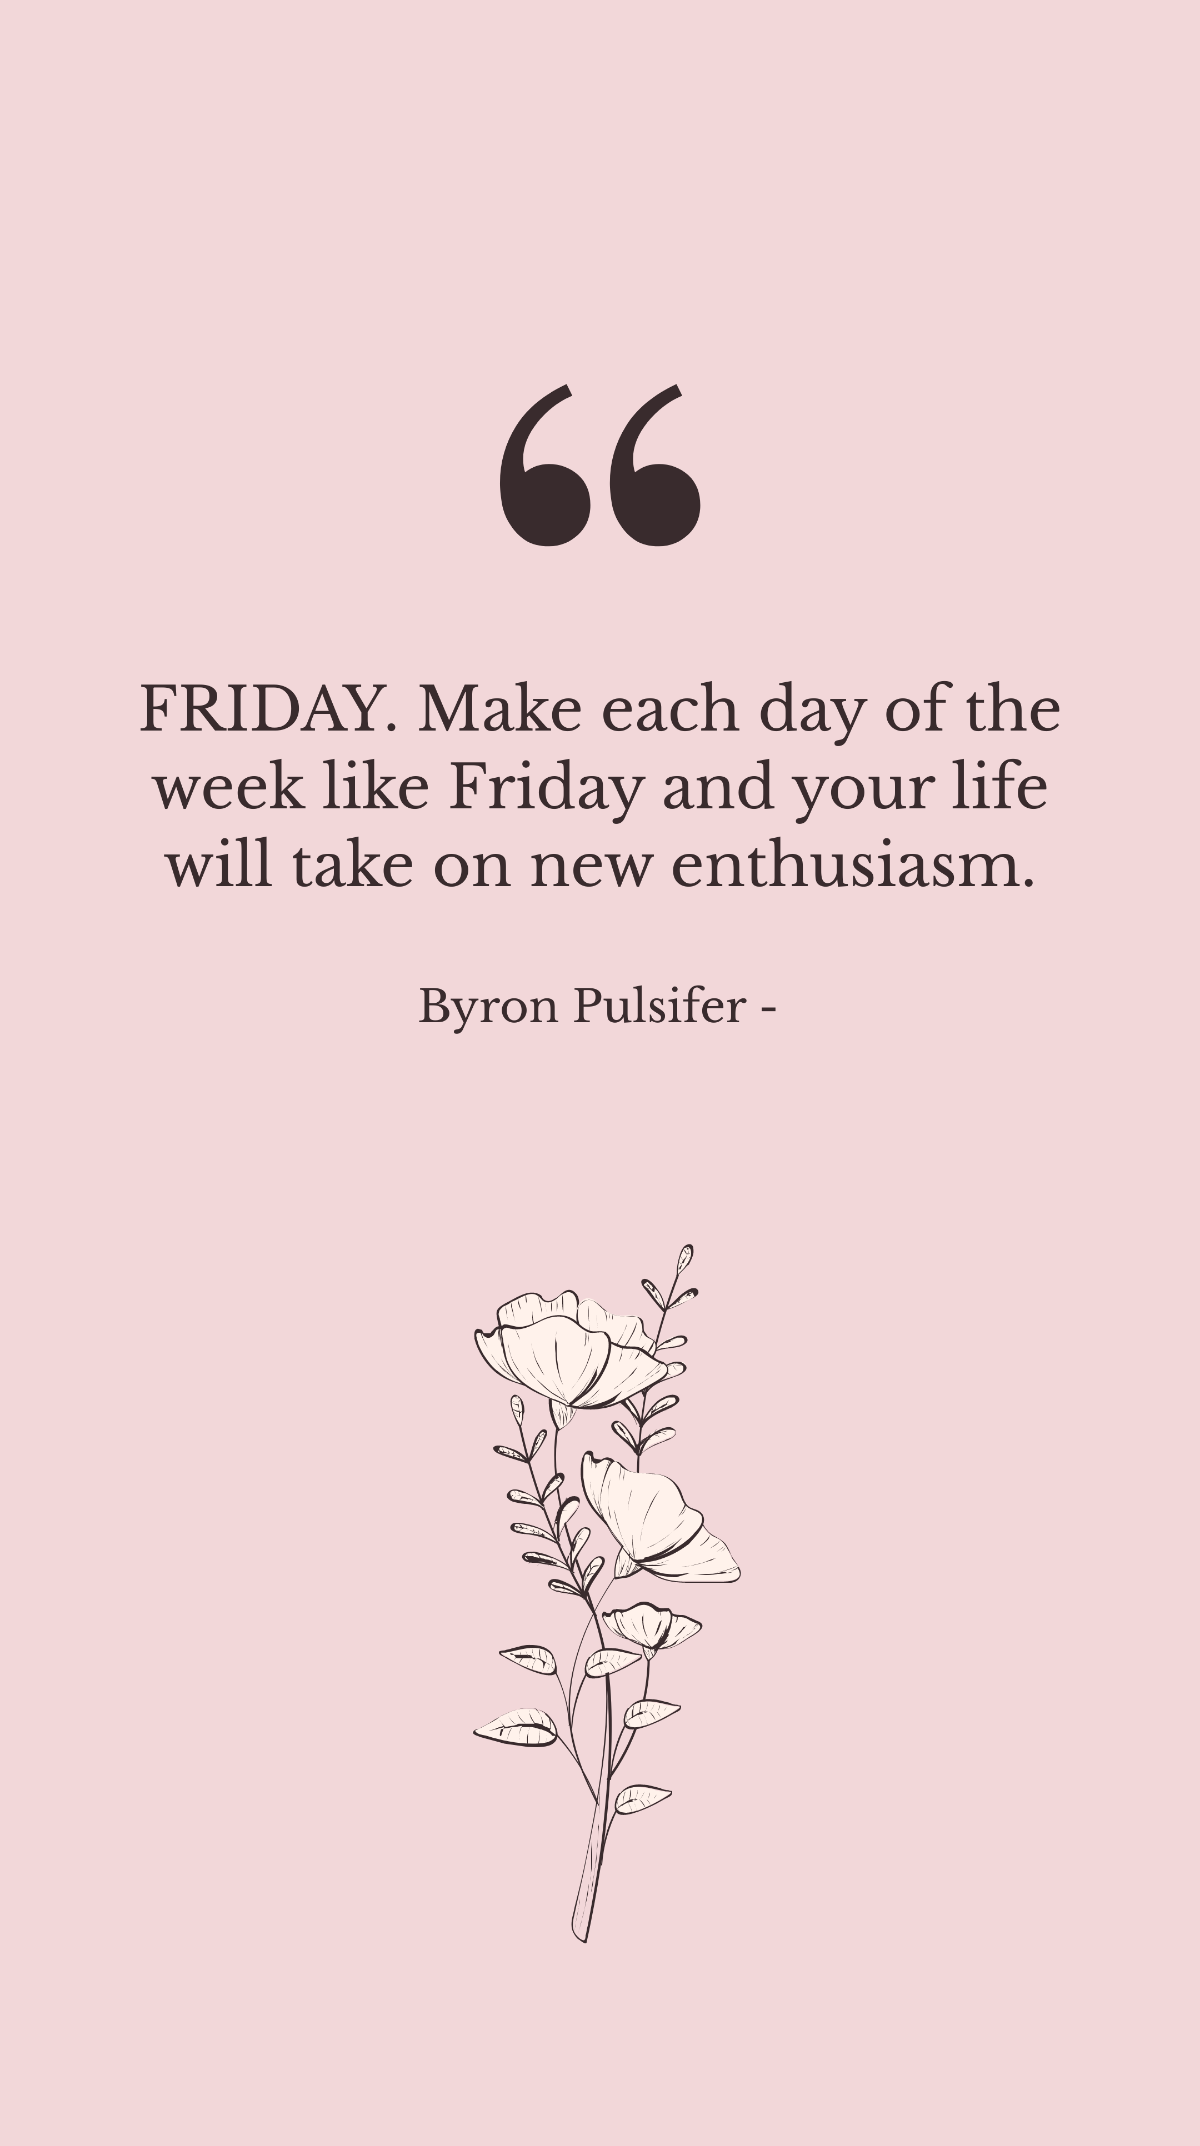 Byron Pulsifer - FRIDAY. Make each day of the week like Friday and your life will take on new enthusiasm. Template